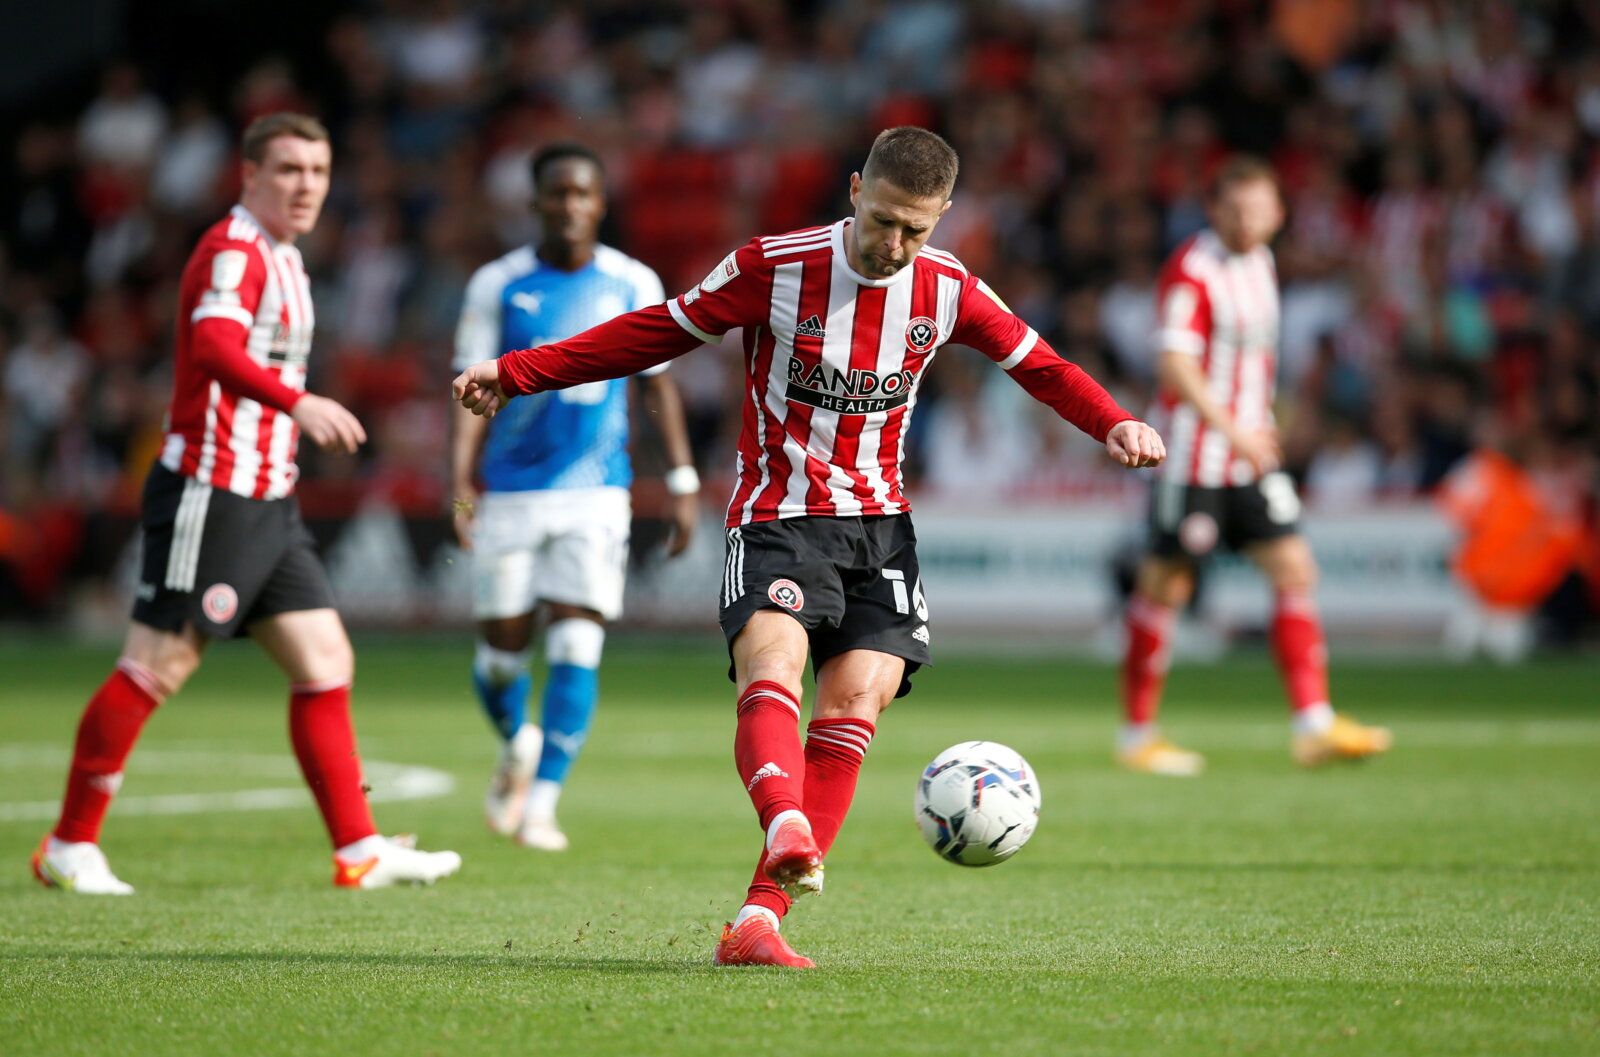 Soccer Football - Championship - Sheffield United v Peterborough United - Bramall Lane, Sheffield, Britain - September 11, 2021 Sheffield United's Oliver Norwood shoots at goal  Action Images/Ed Sykes  EDITORIAL USE ONLY. No use with unauthorized audio, video, data, fixture lists, club/league logos or 